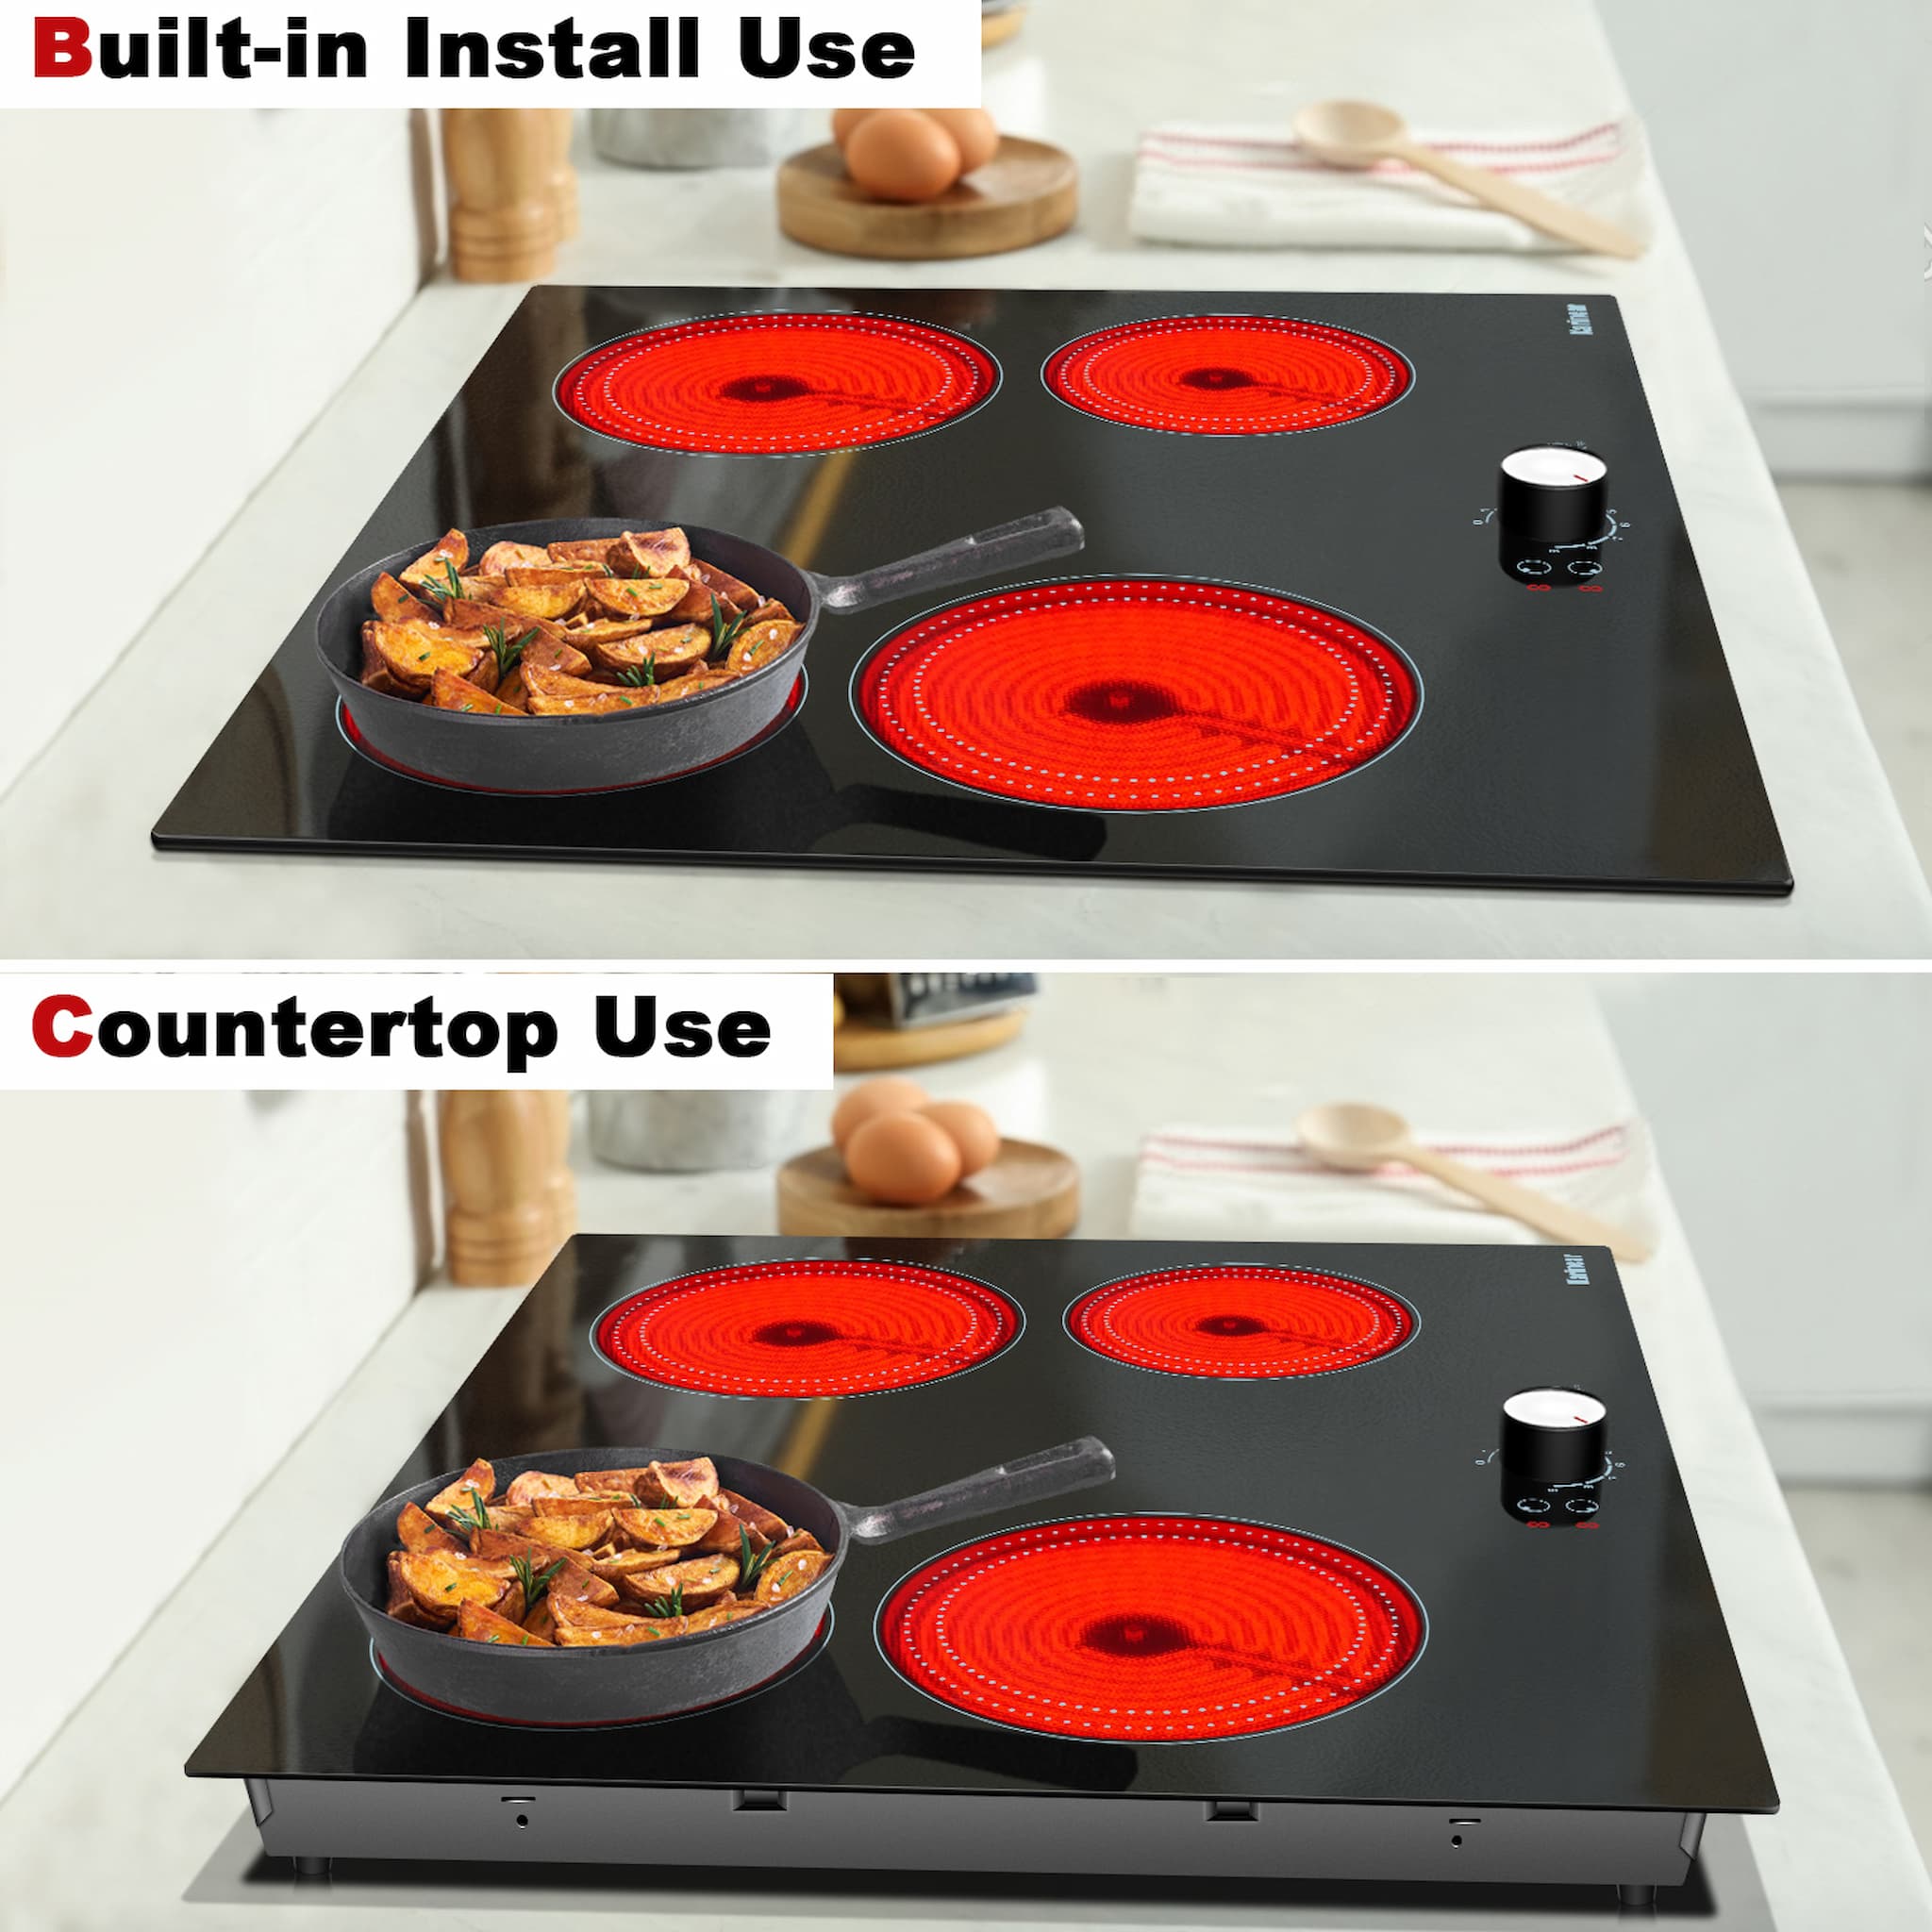 This knob electric stove is safer than the induction stove because it is heated by a coil and does not release radiation that can harm human health. It is also equipped with a variety of features to protect safety, such as "H" will show which heating zone is hot to touch, so you can use it with more peace of mind.